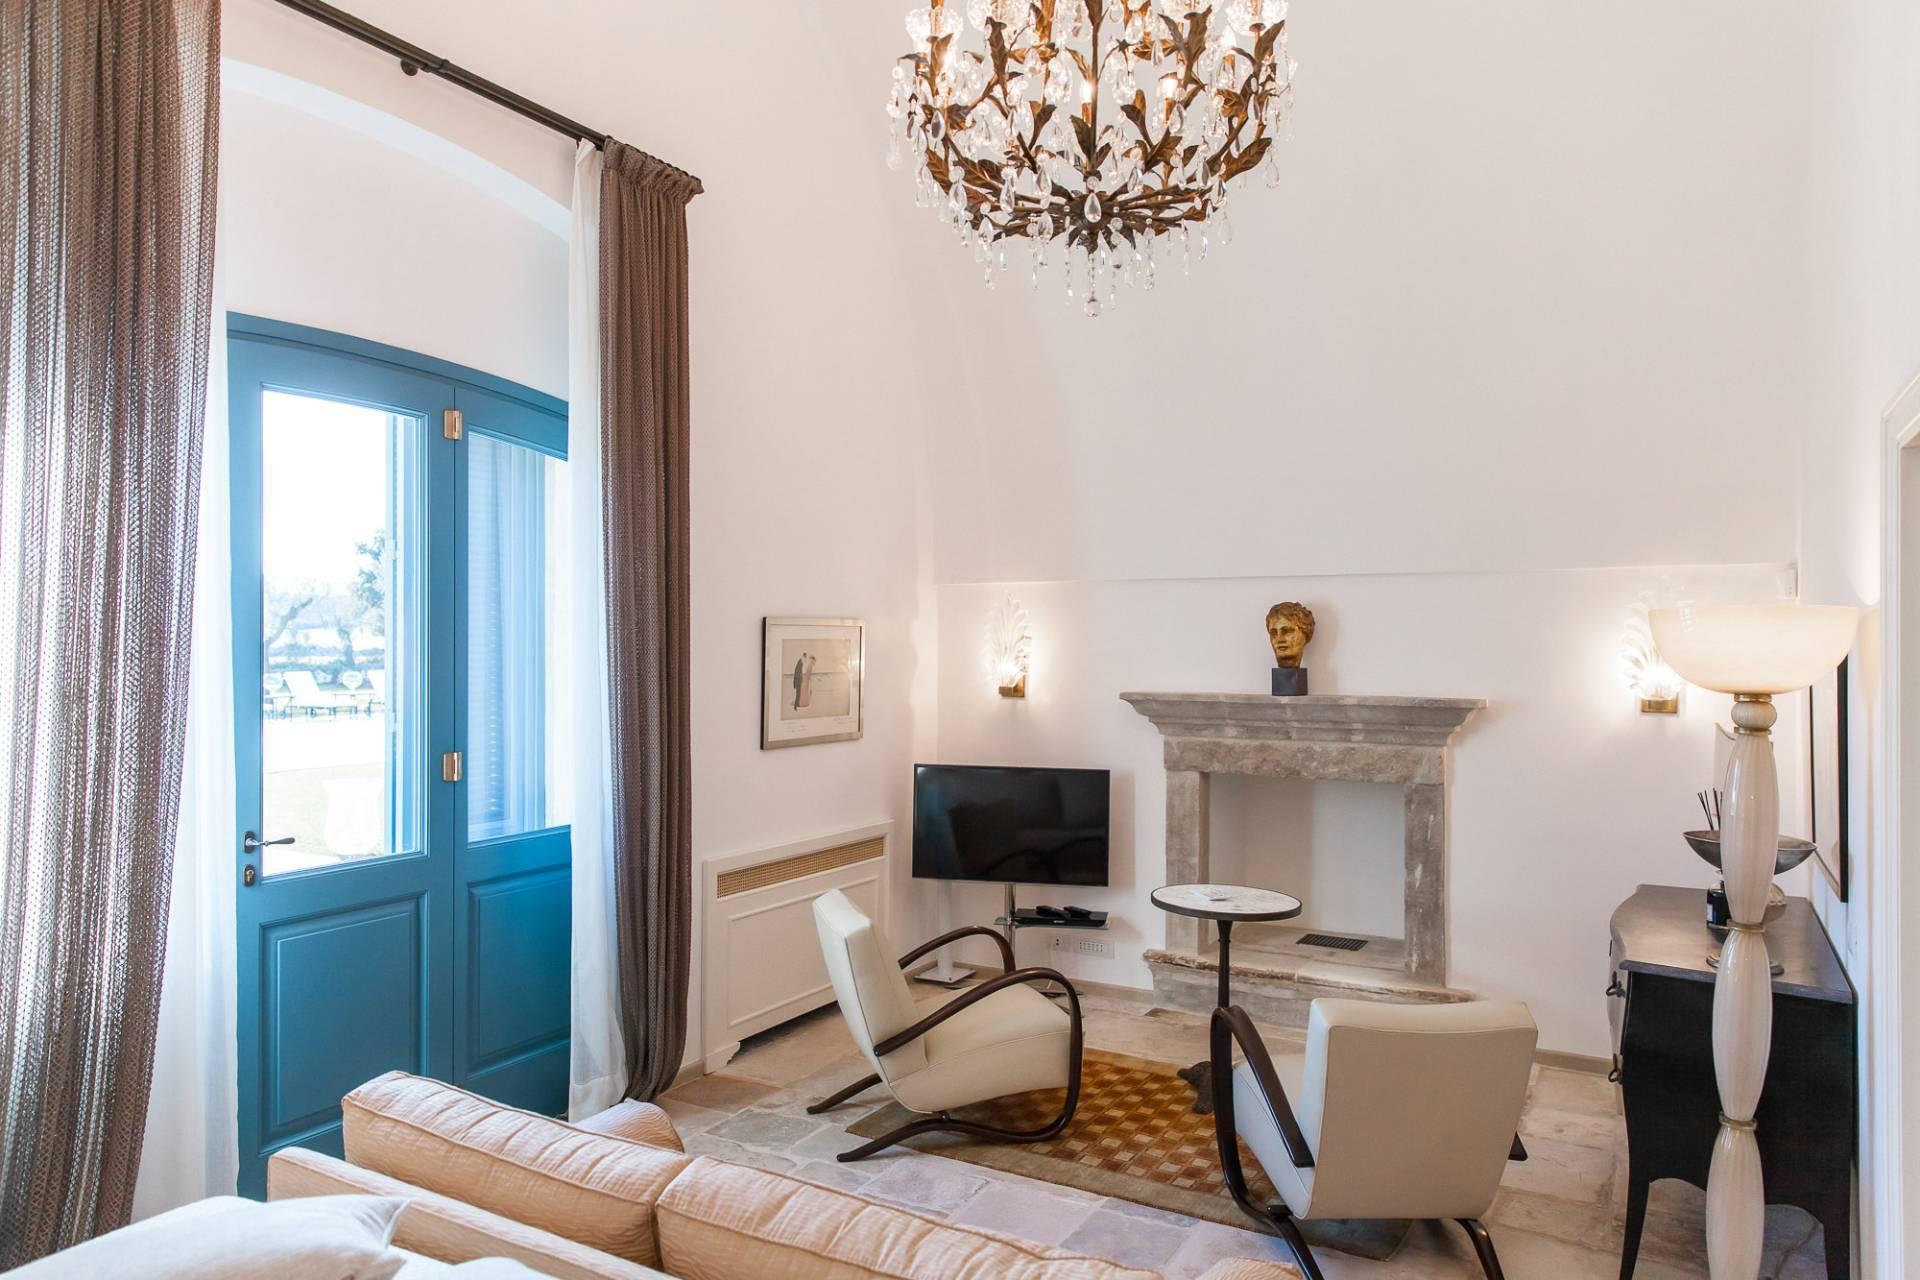 A historic estate with modern luxury in the heart of Puglia - 8